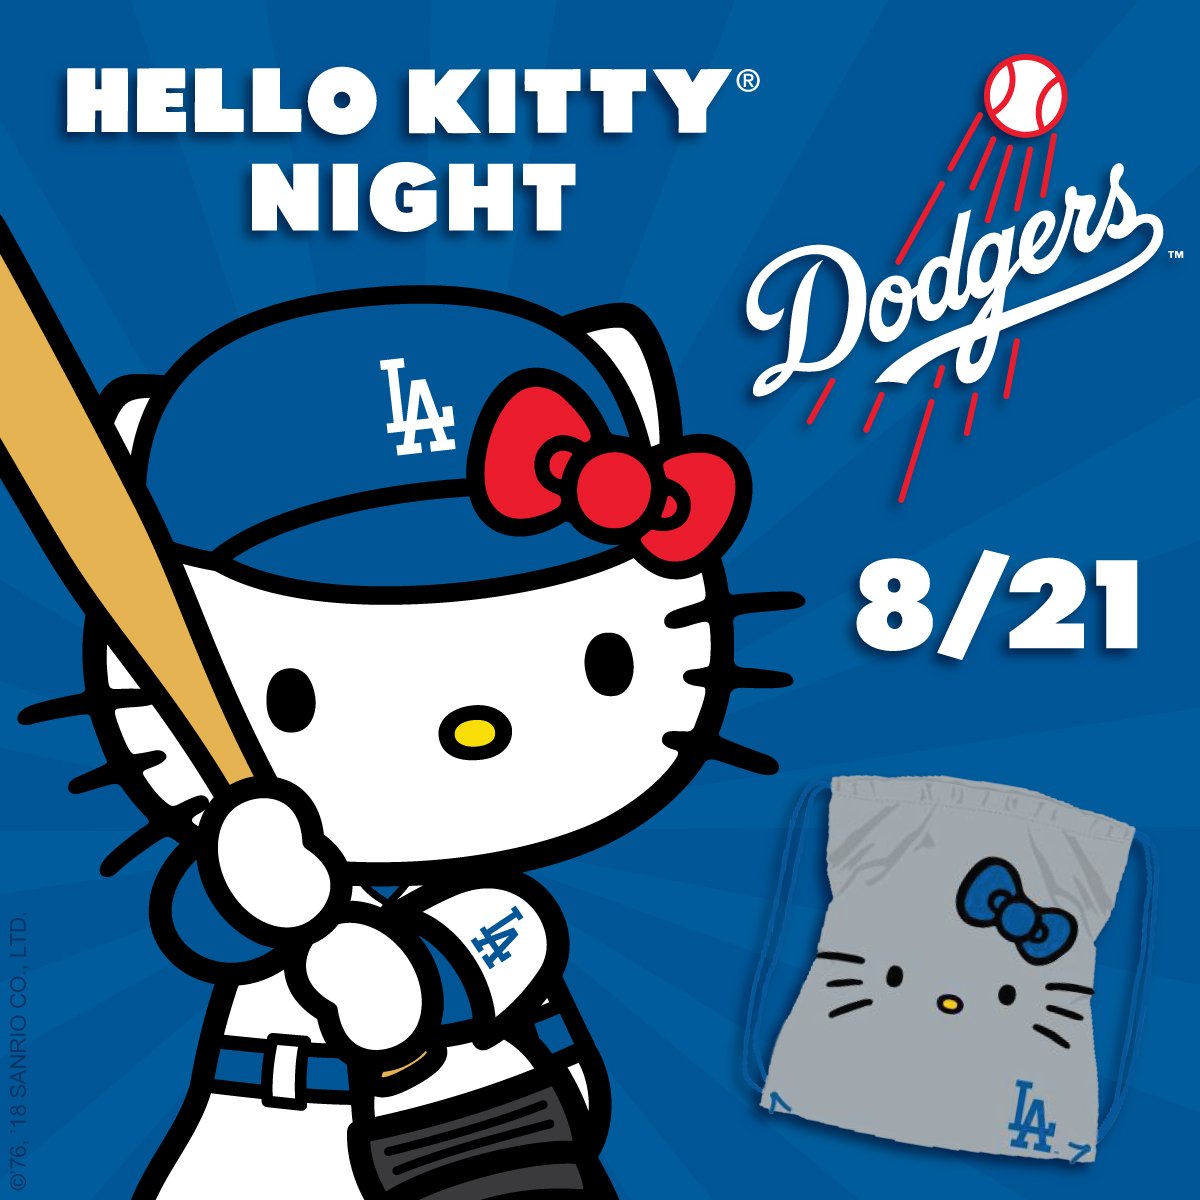 Dodgers Unveil 2017 Ticket Packages, Including Hello Kitty Night